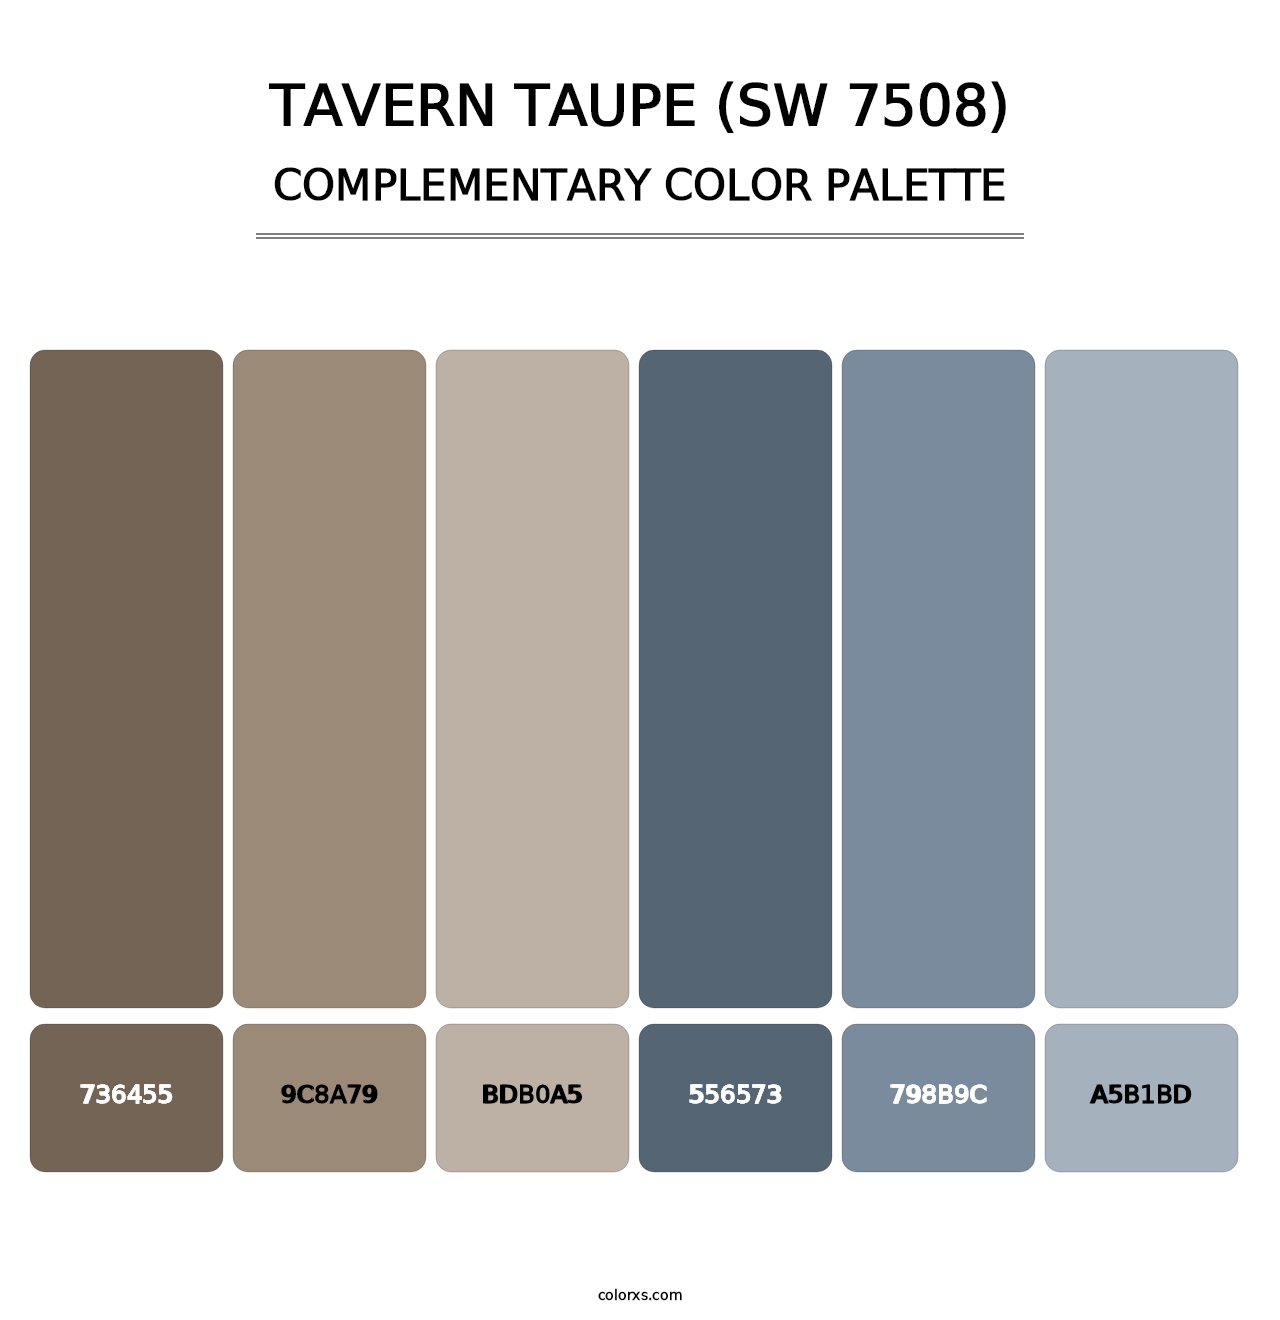 Tavern Taupe (SW 7508) - Complementary Color Palette